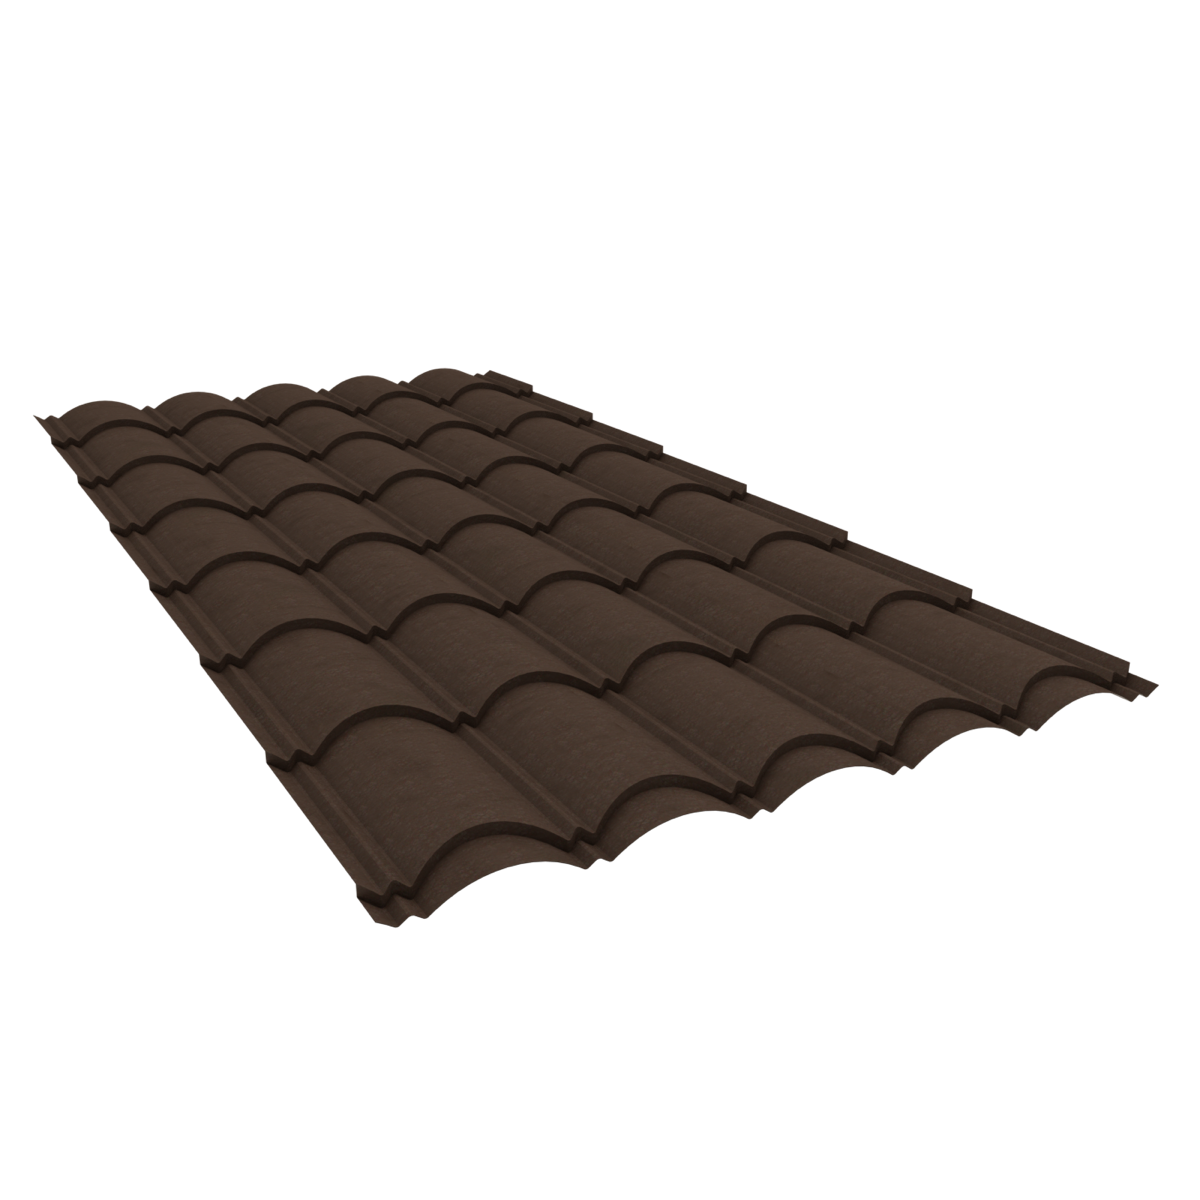 Orientile 28G Chocolate Textured Roofing Sheet